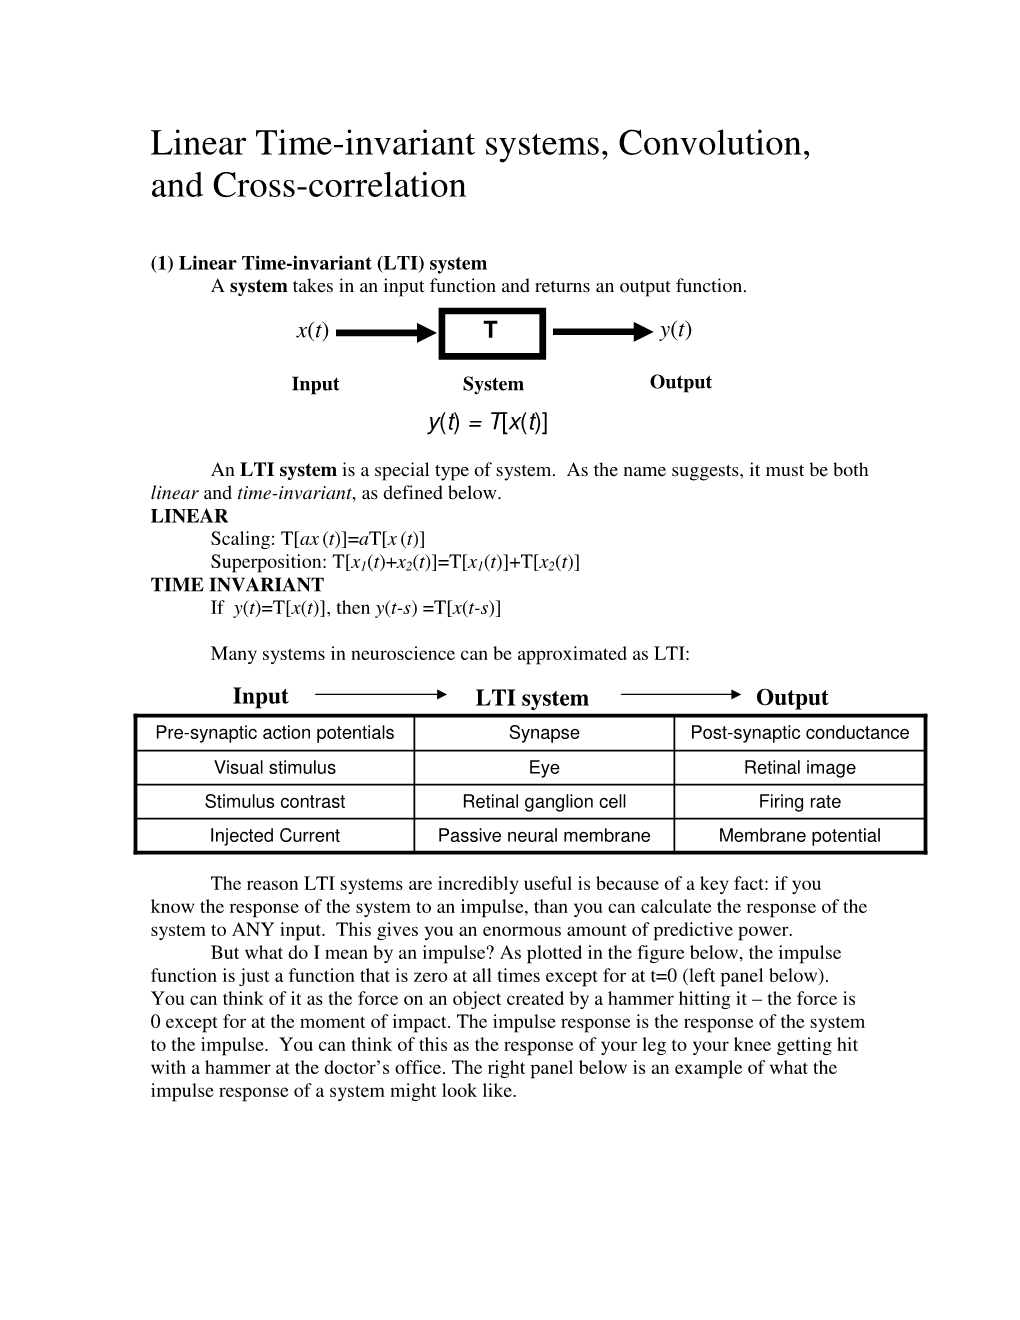 Linear Time-Invariant Systems, Convolution, and Cross-Correlation